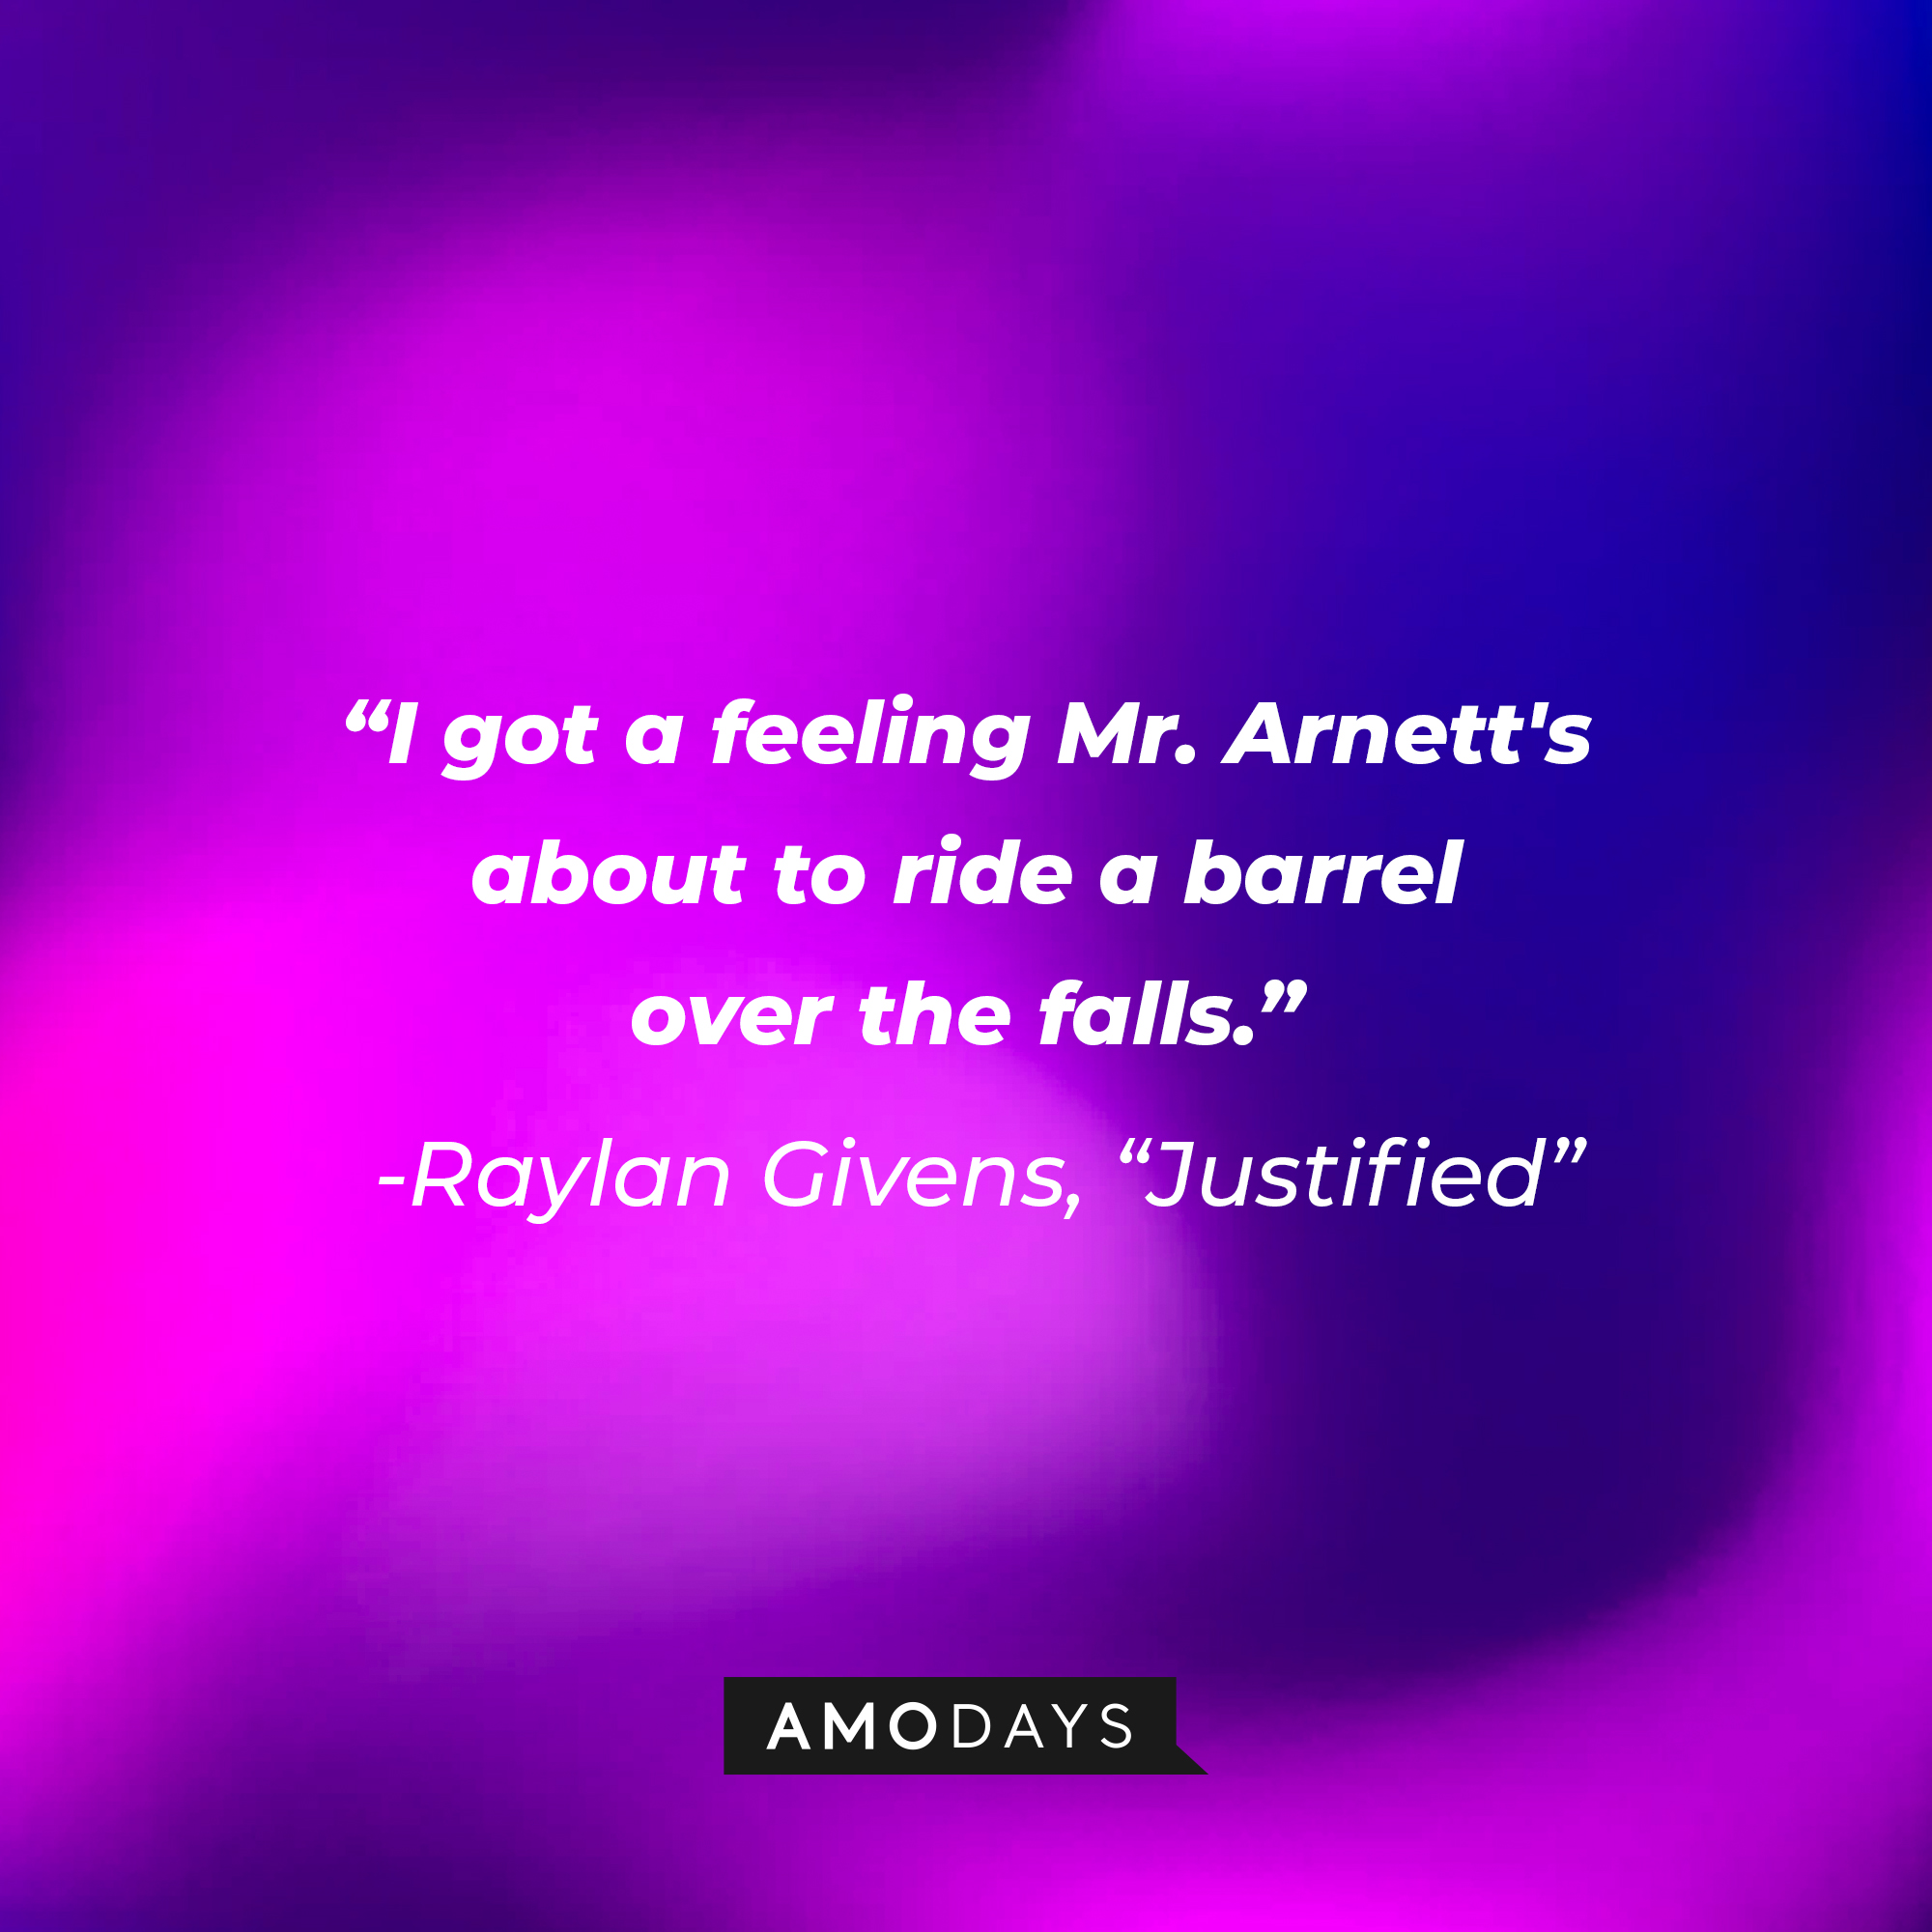 Raylan Givens’ quote from “Justified”: “I got a feeling Mr. Arnett's about to ride a barrel over the falls.” | Source: AmoDays